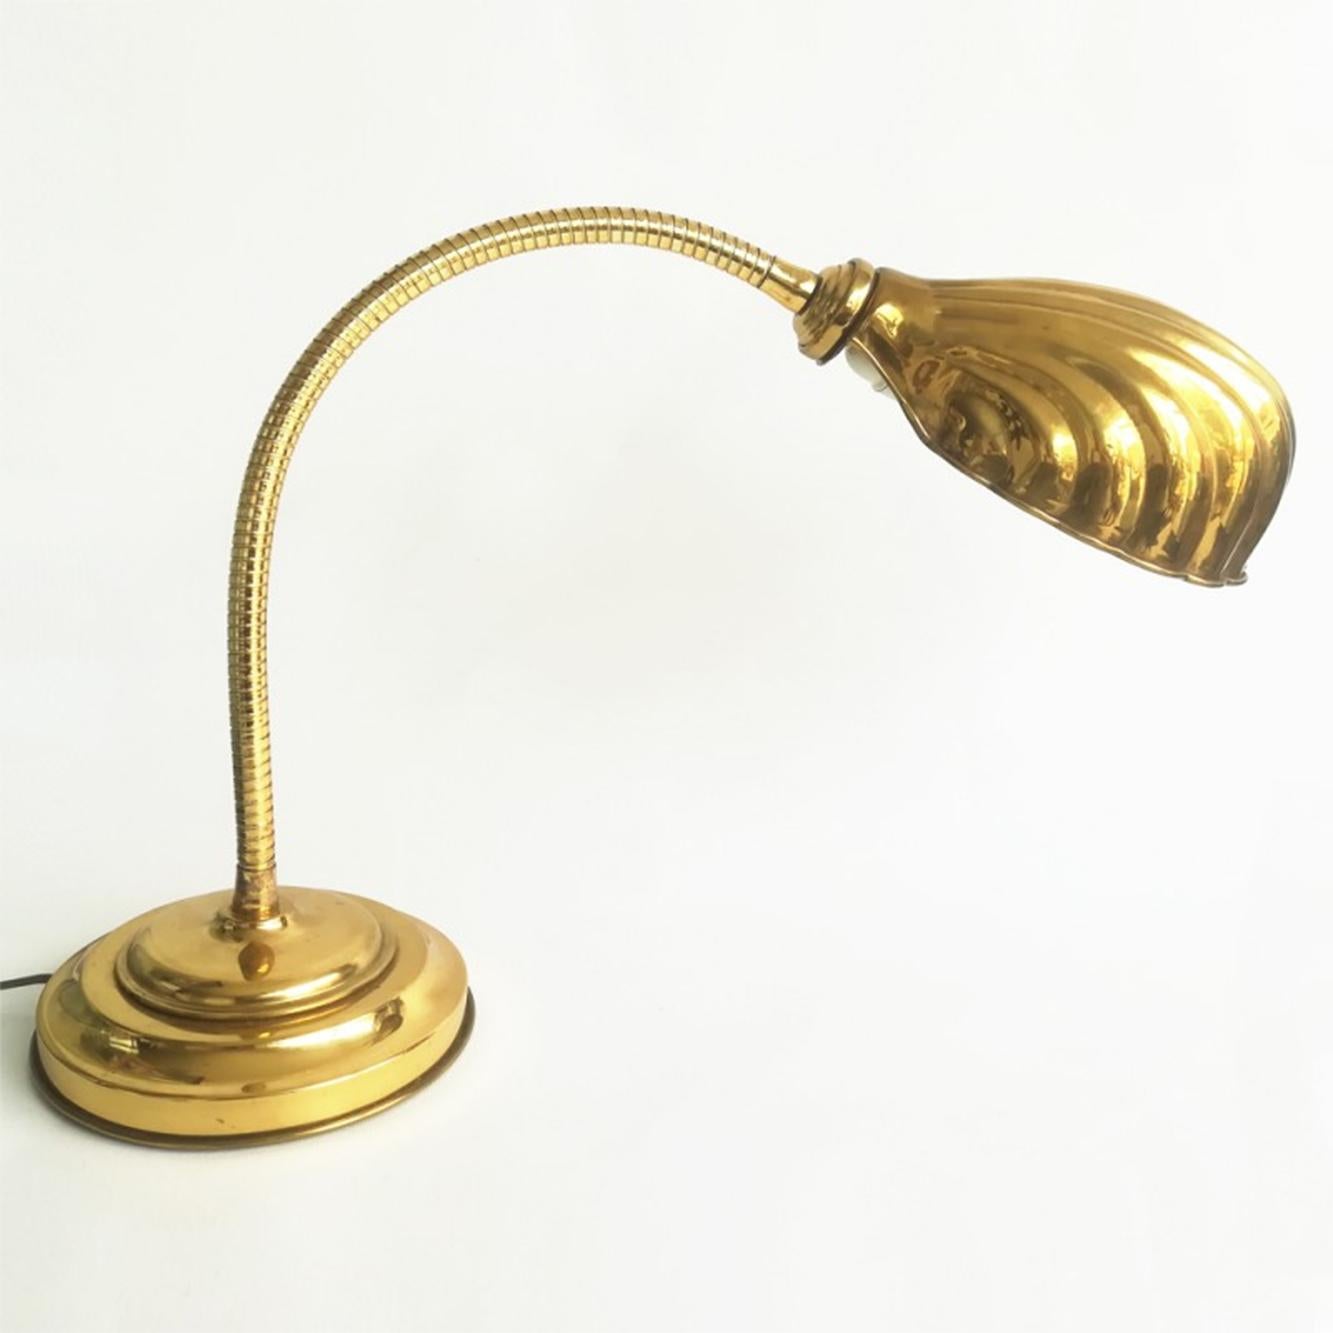 Desk shell Flexo lamp, early 20th century Art Nouveau, Art Deco. Table lamp

Antique brass gooseneck lamp, early 20th century

Perfect condition, like new, working

It is beautiful with its shell that can be rotated.

Very beautiful and unique and